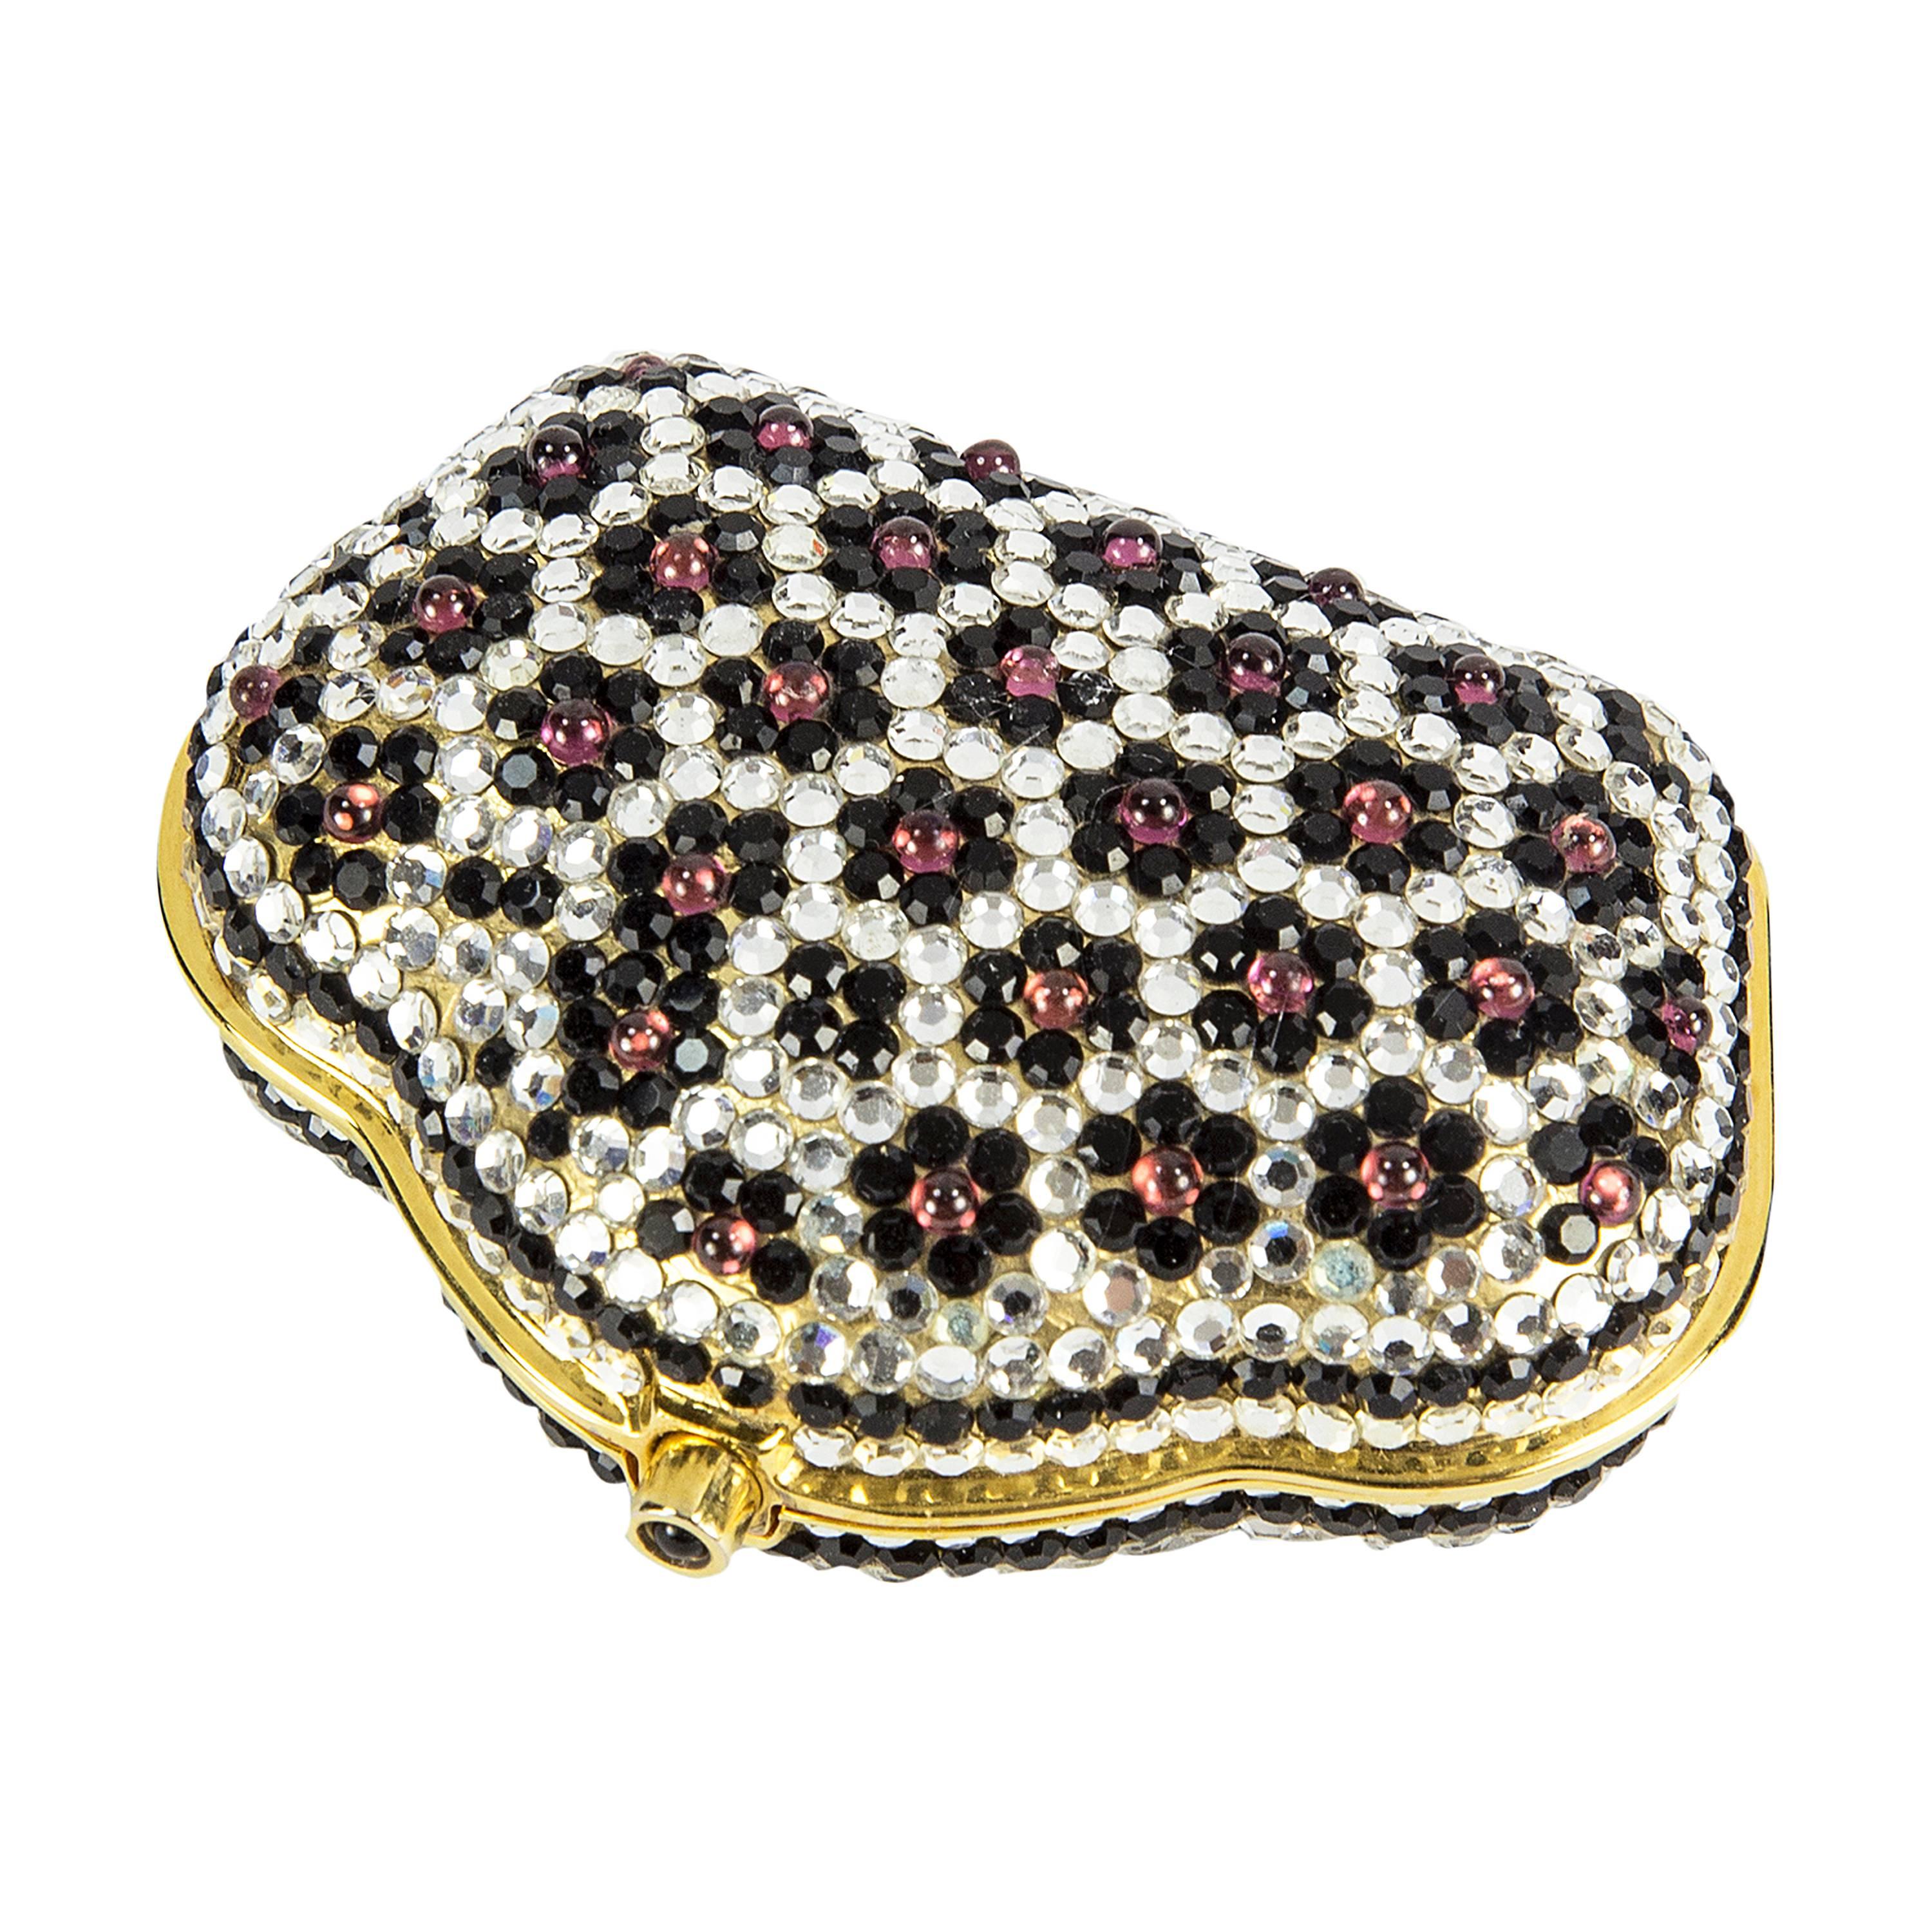 Must Have Trinket or Pill Box encrusted with Swarovski Crystals in Black, Silver and Pinkish Red stones. Signed: Judith Leiber on the inside. Approx. size: 2.65” wide x 1.90” high x .75” deep. Never used. Add a little magic to the everyday! 
